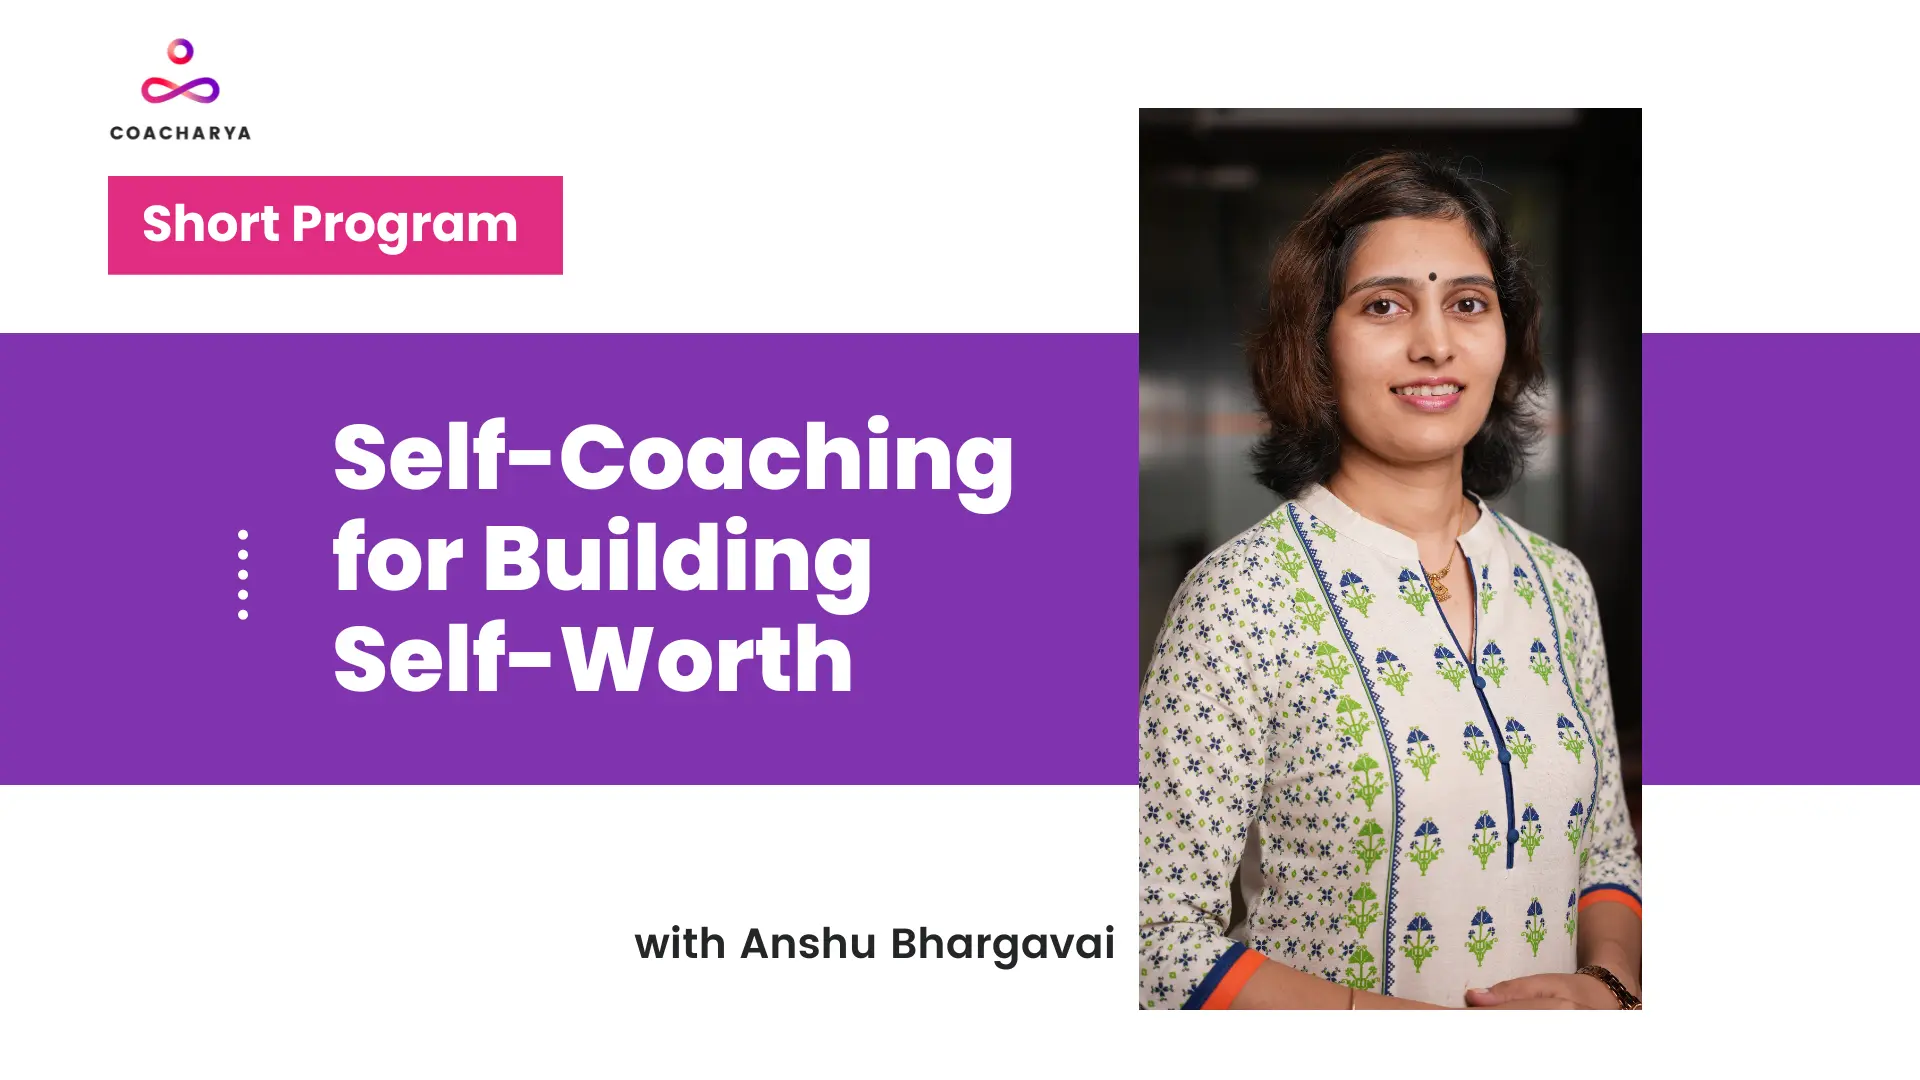 Self-Coaching for Building Self-Worth